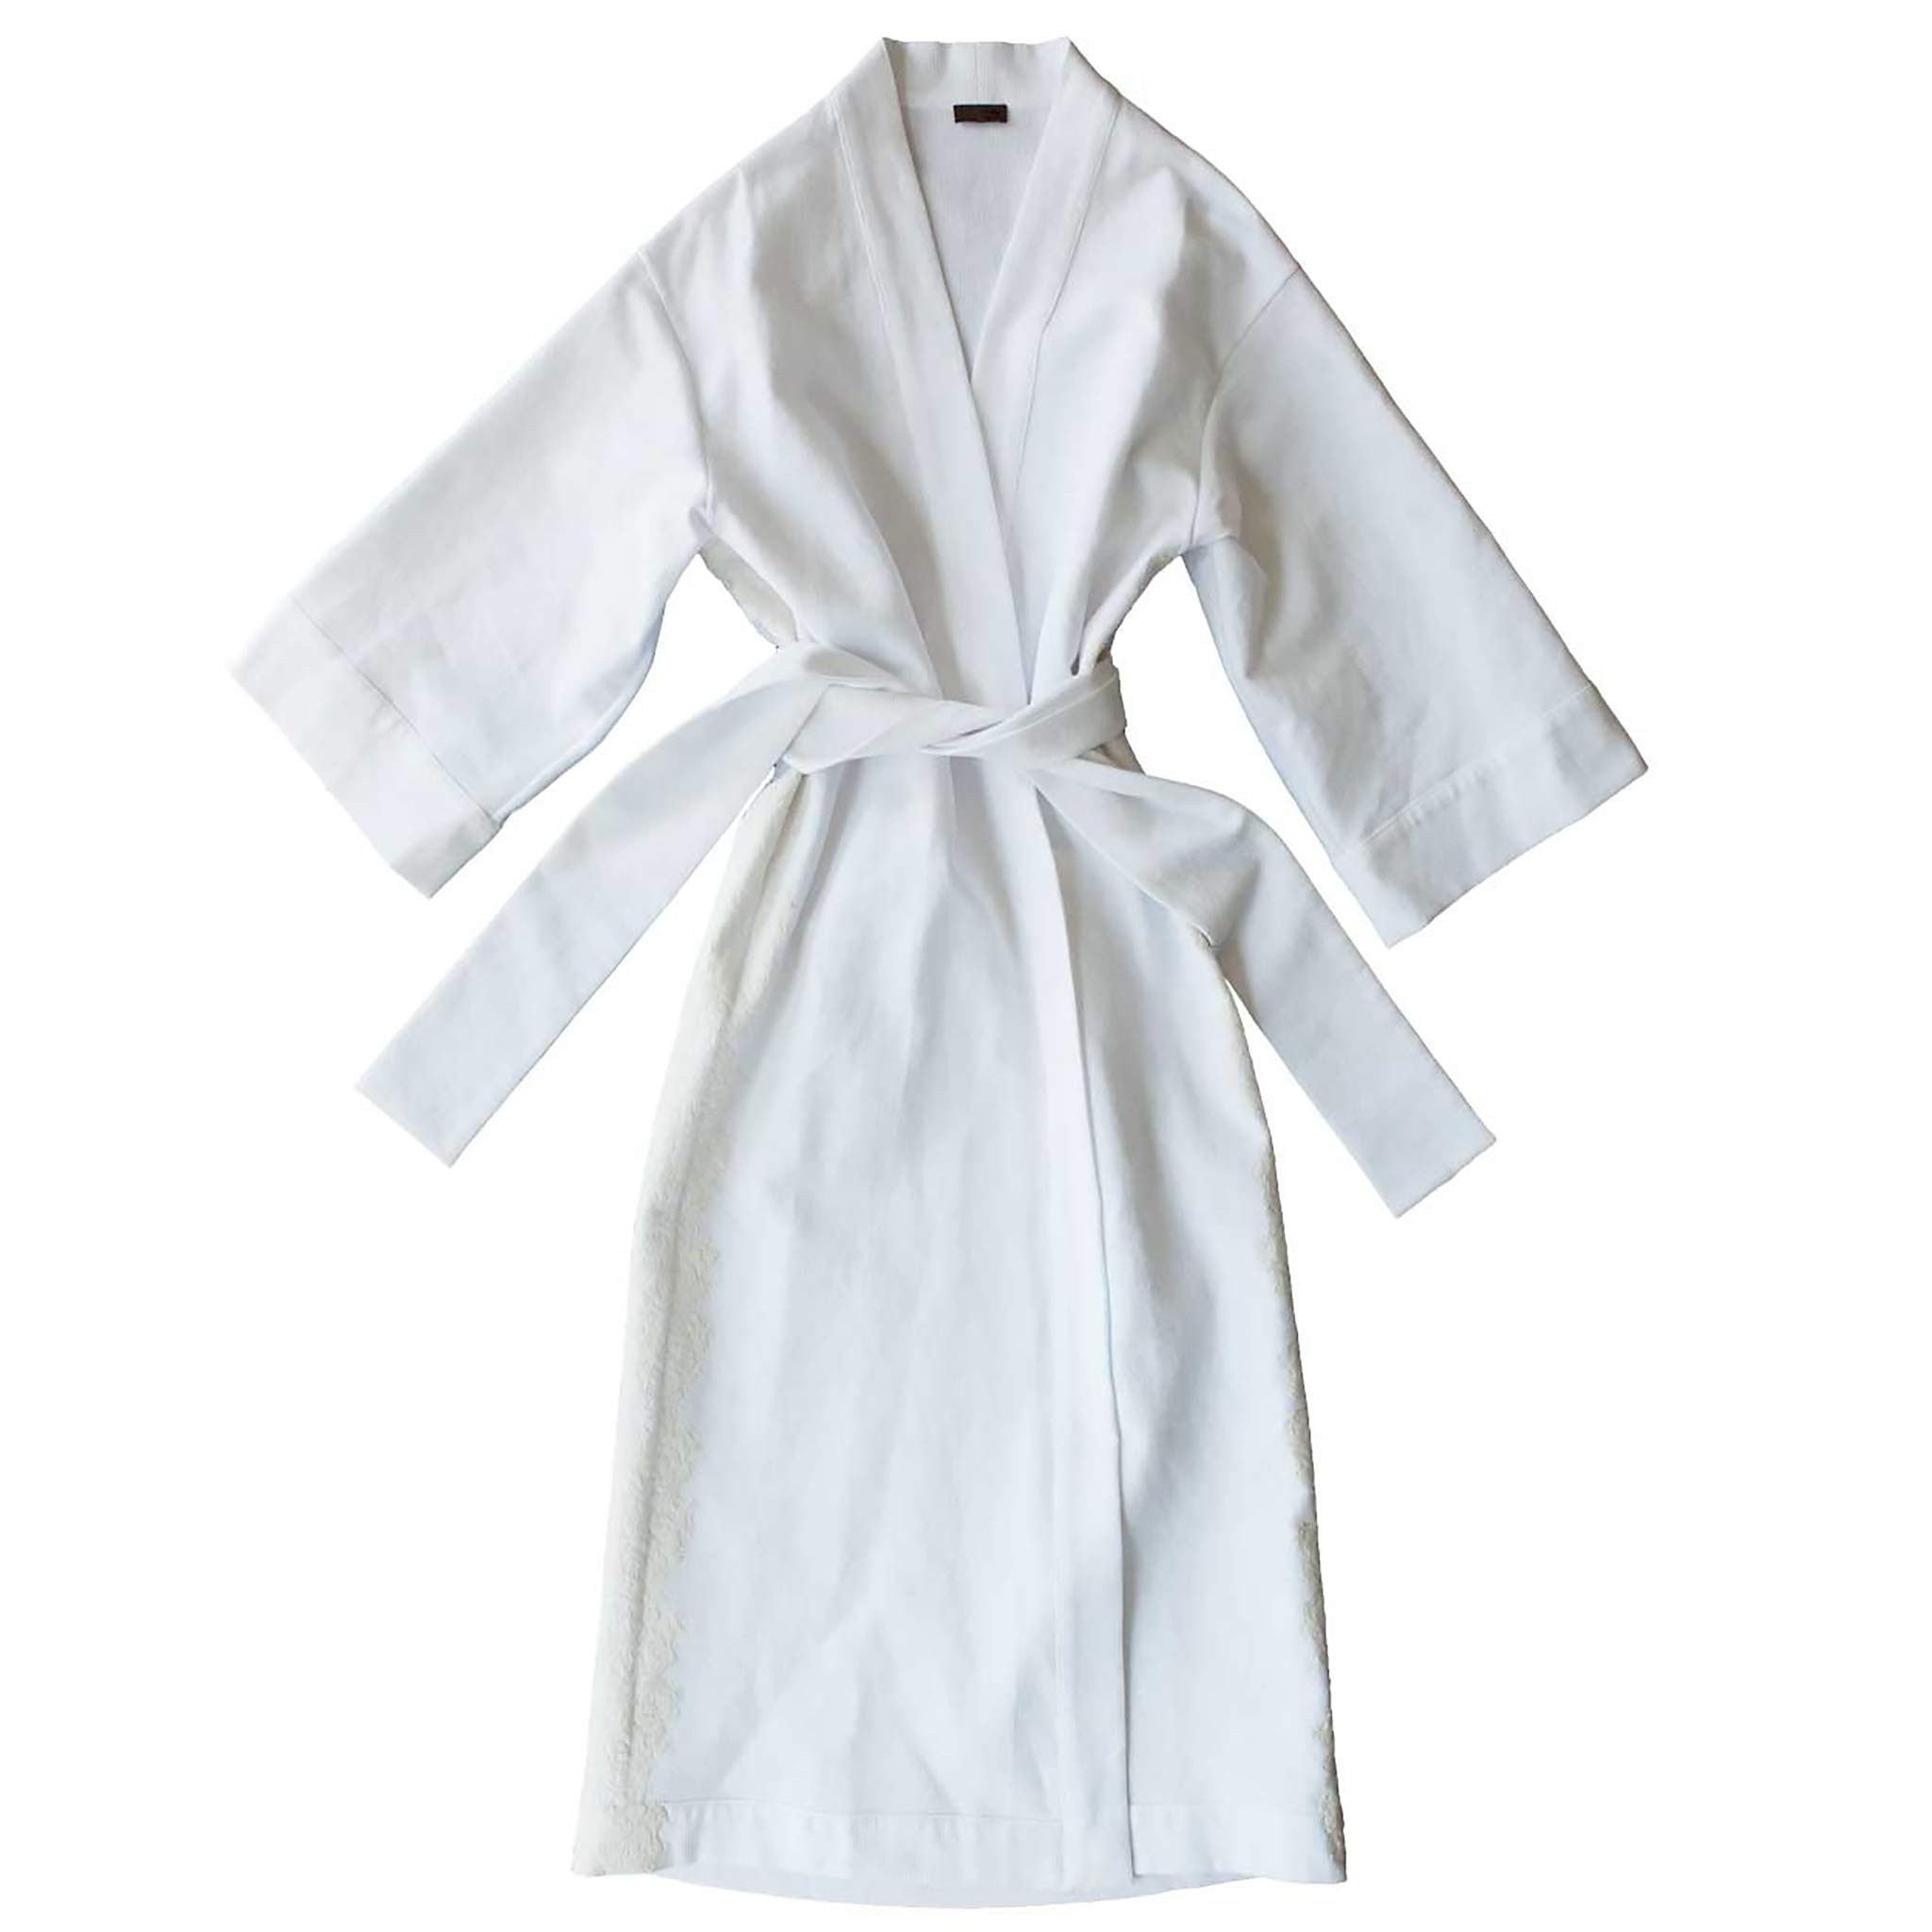 Asteria Kimono Robe in Swiss Cotton Waffle Pique with Lace